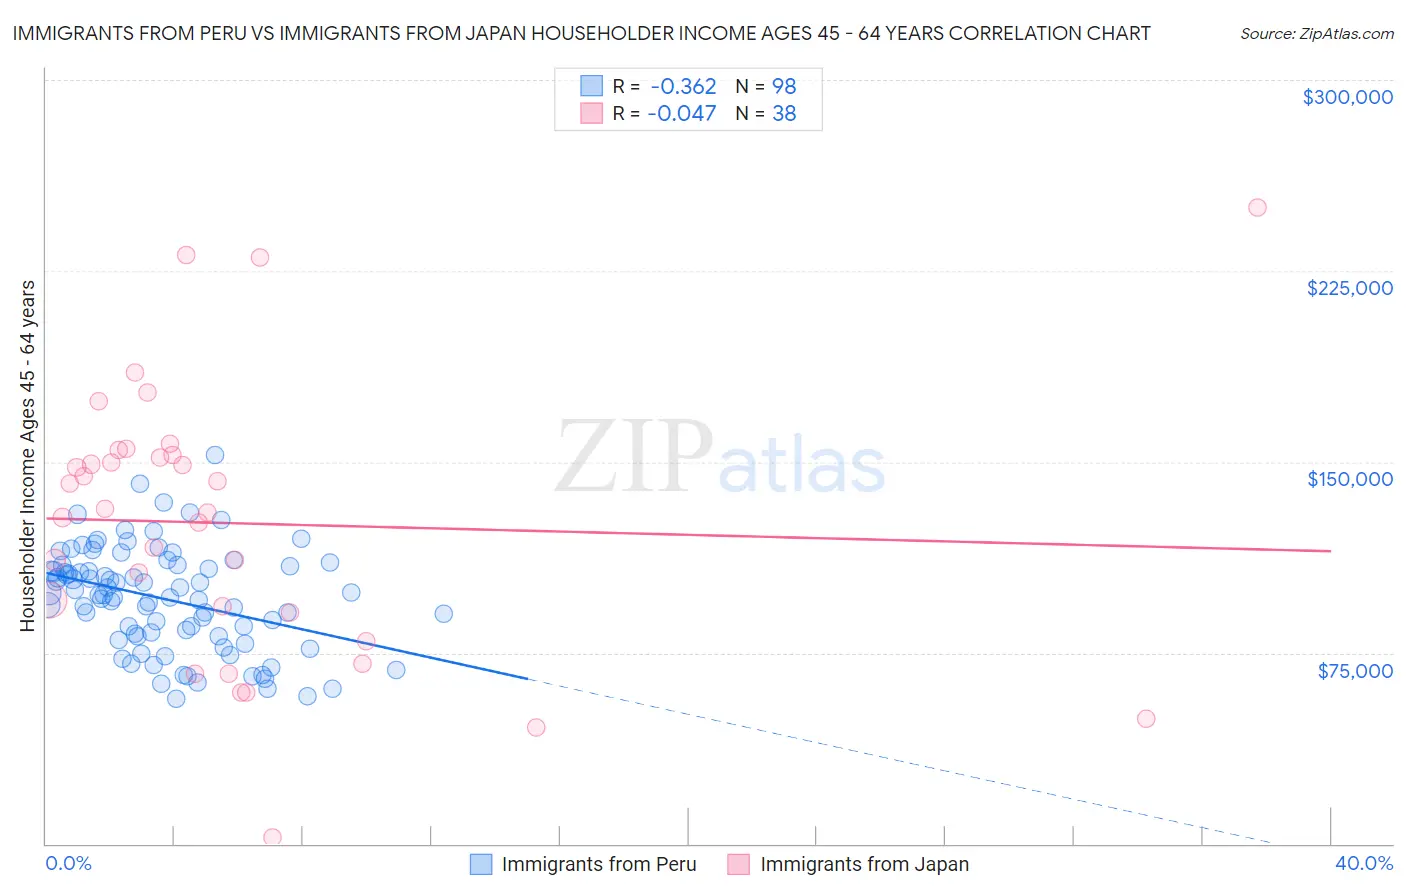 Immigrants from Peru vs Immigrants from Japan Householder Income Ages 45 - 64 years